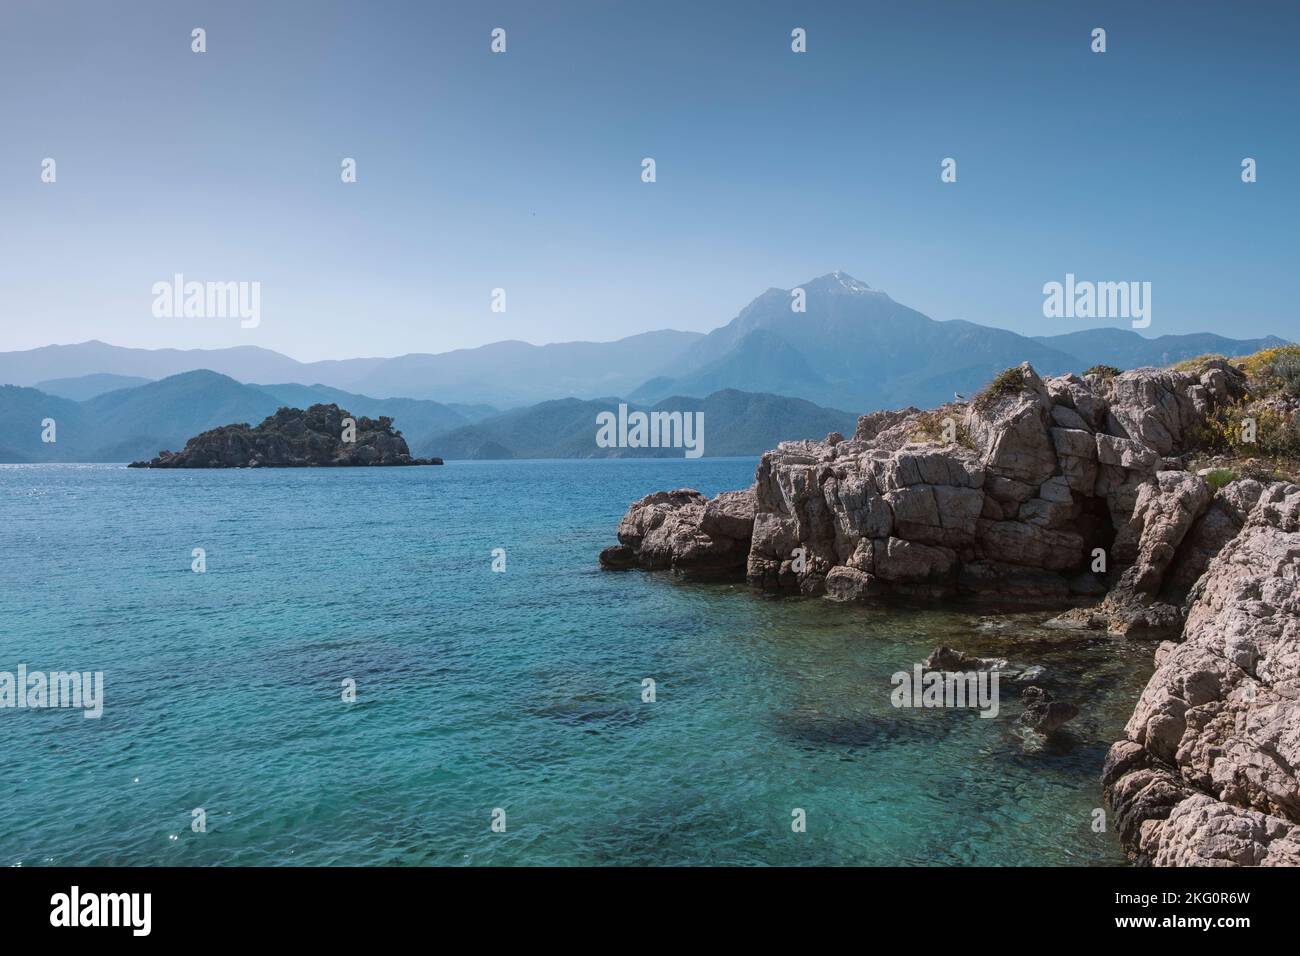 rocky sea shore landscape with distant island and Mt.Tahtali in Antalya province, Turkey Stock Photo